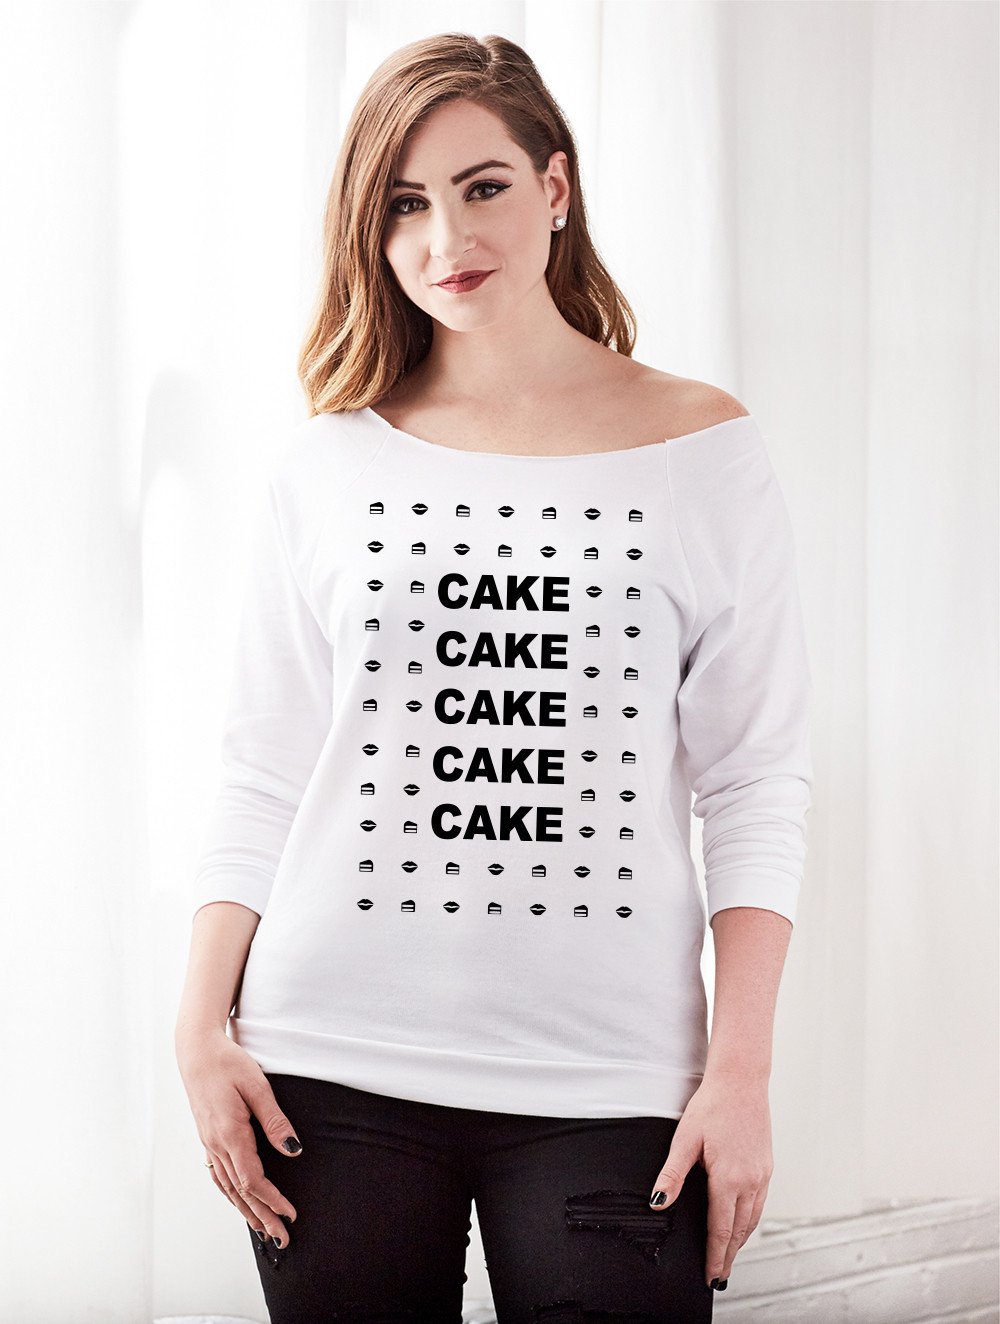 Cake Cake Cake f the Shoulder Ugly Christmas Sweater for Women